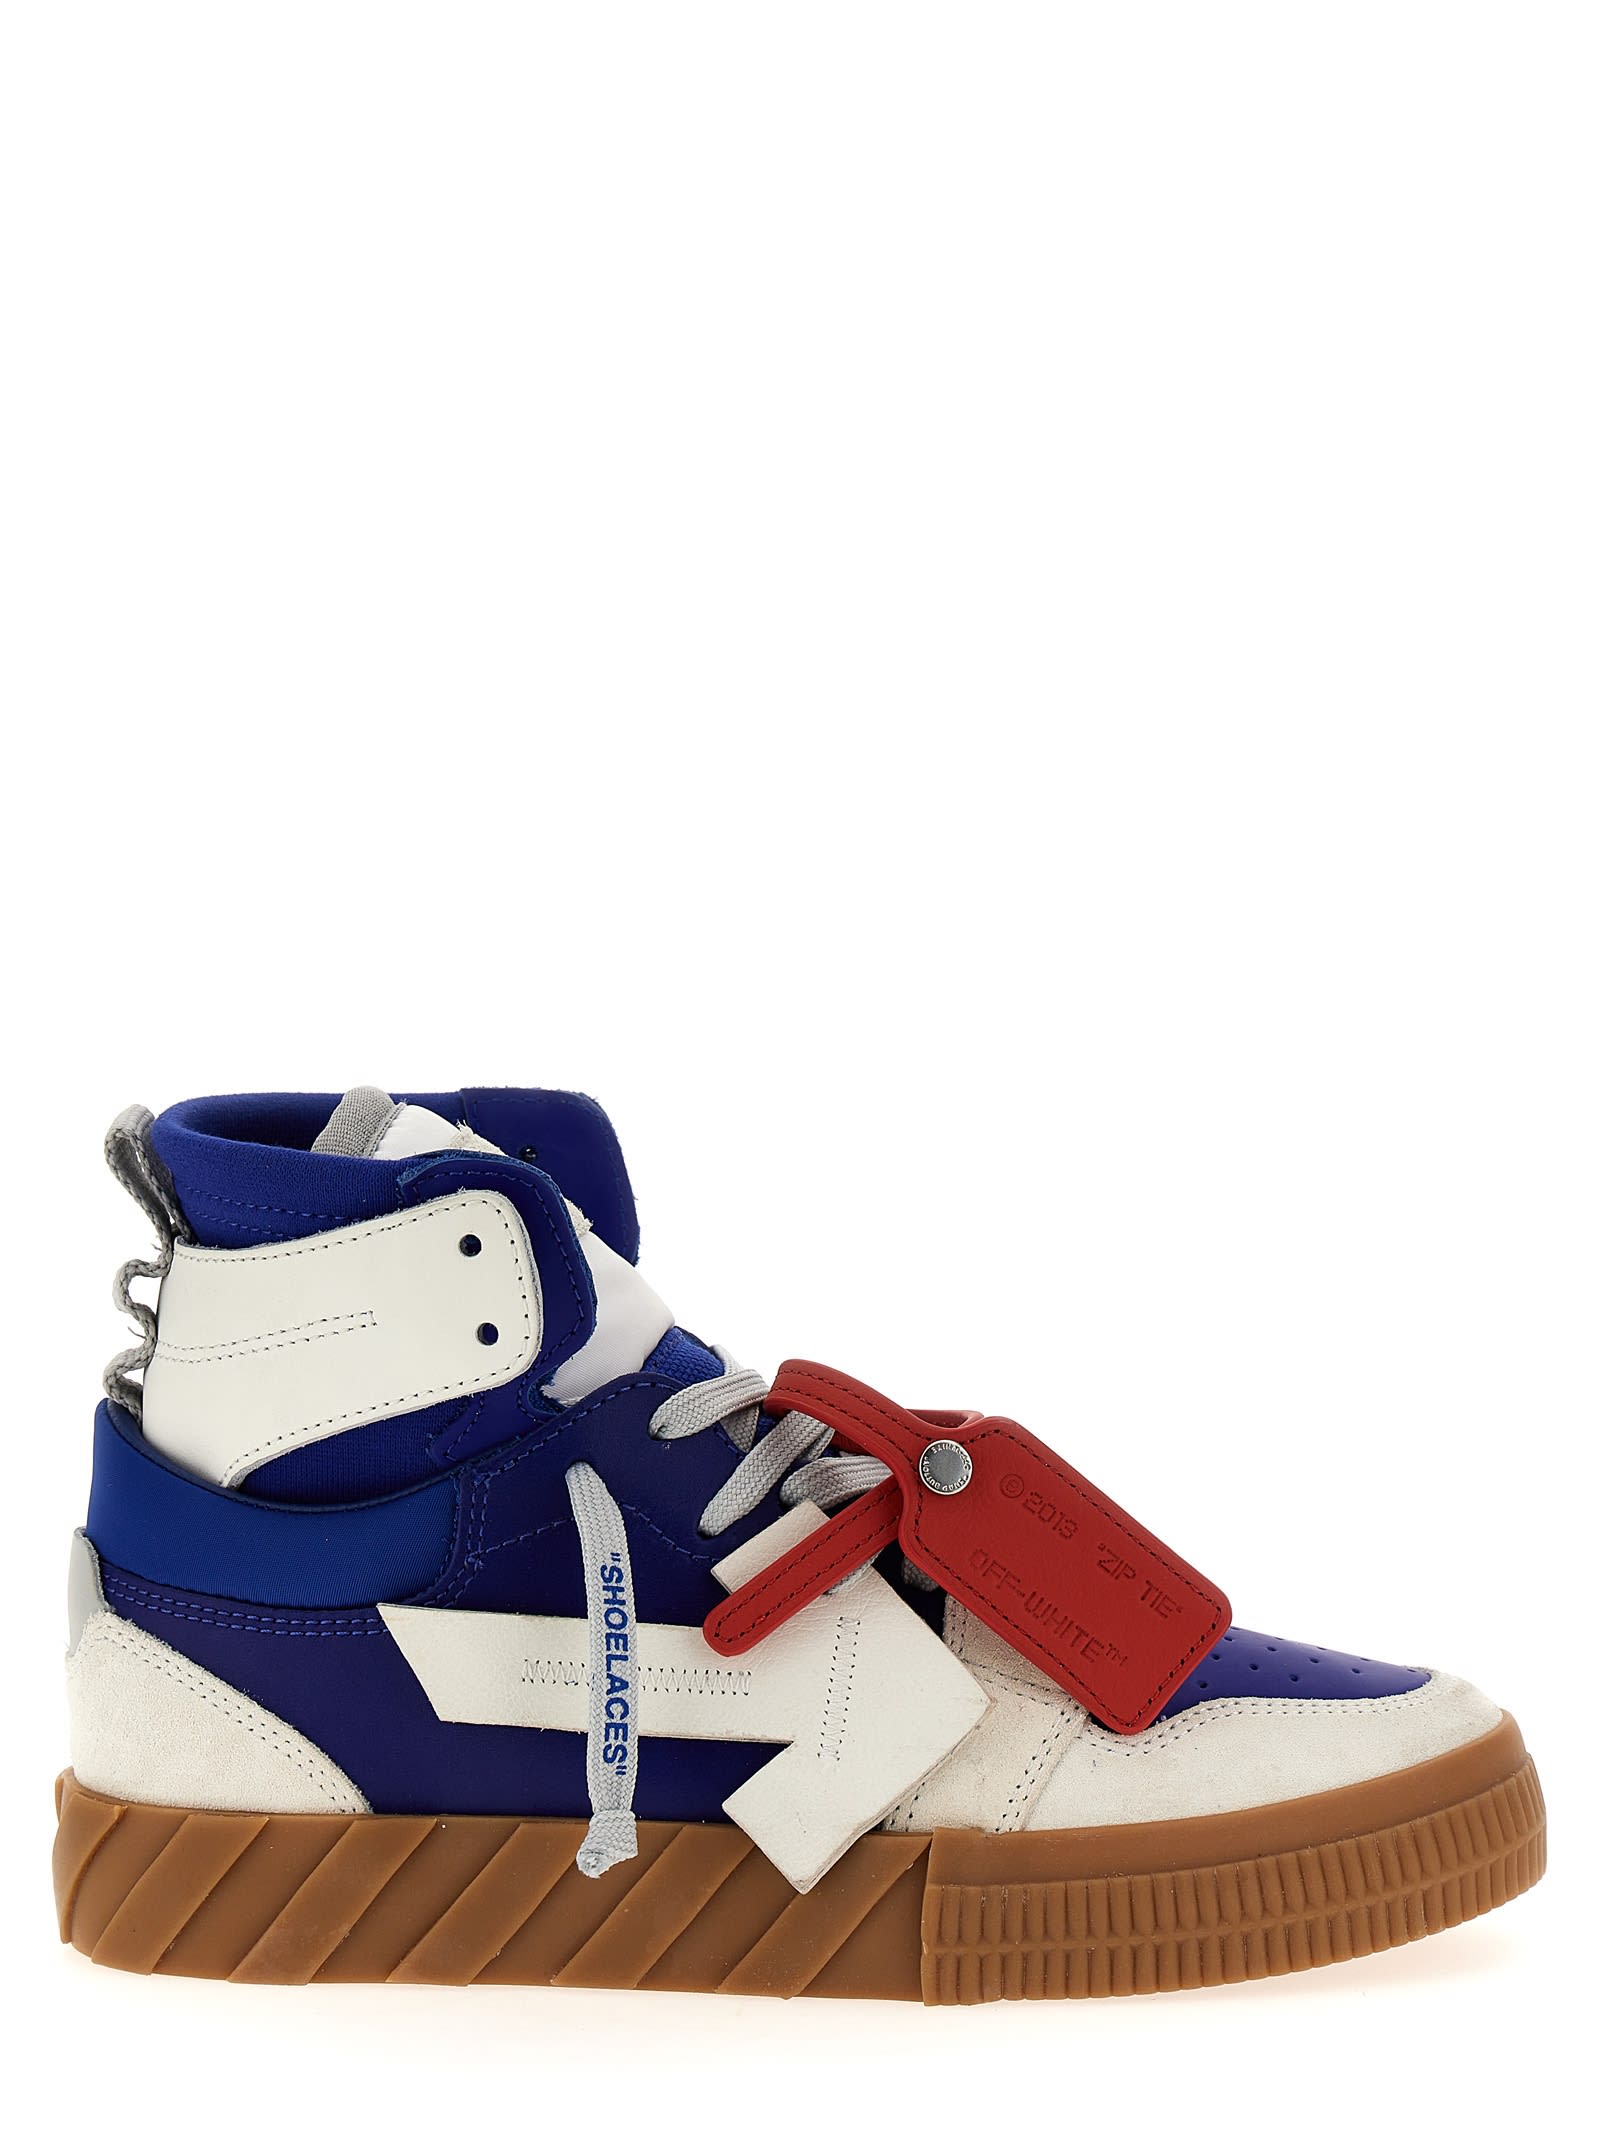 OFF-WHITE FLOATING ARROW SNEAKERS